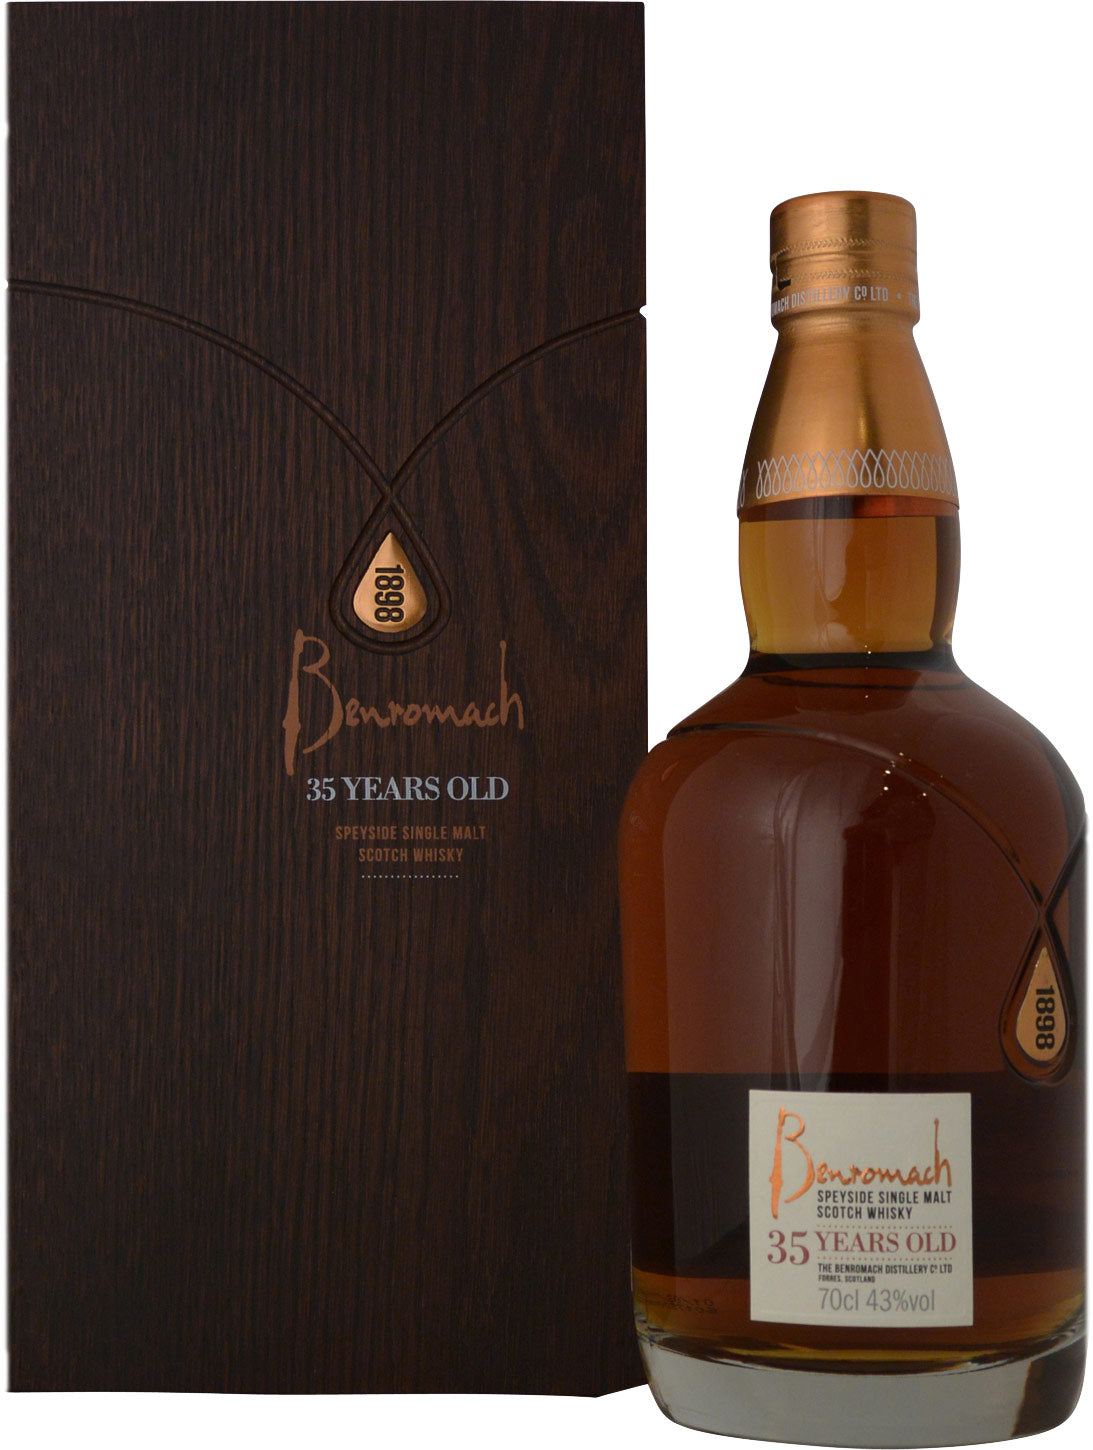 Benromach 35 Year Old